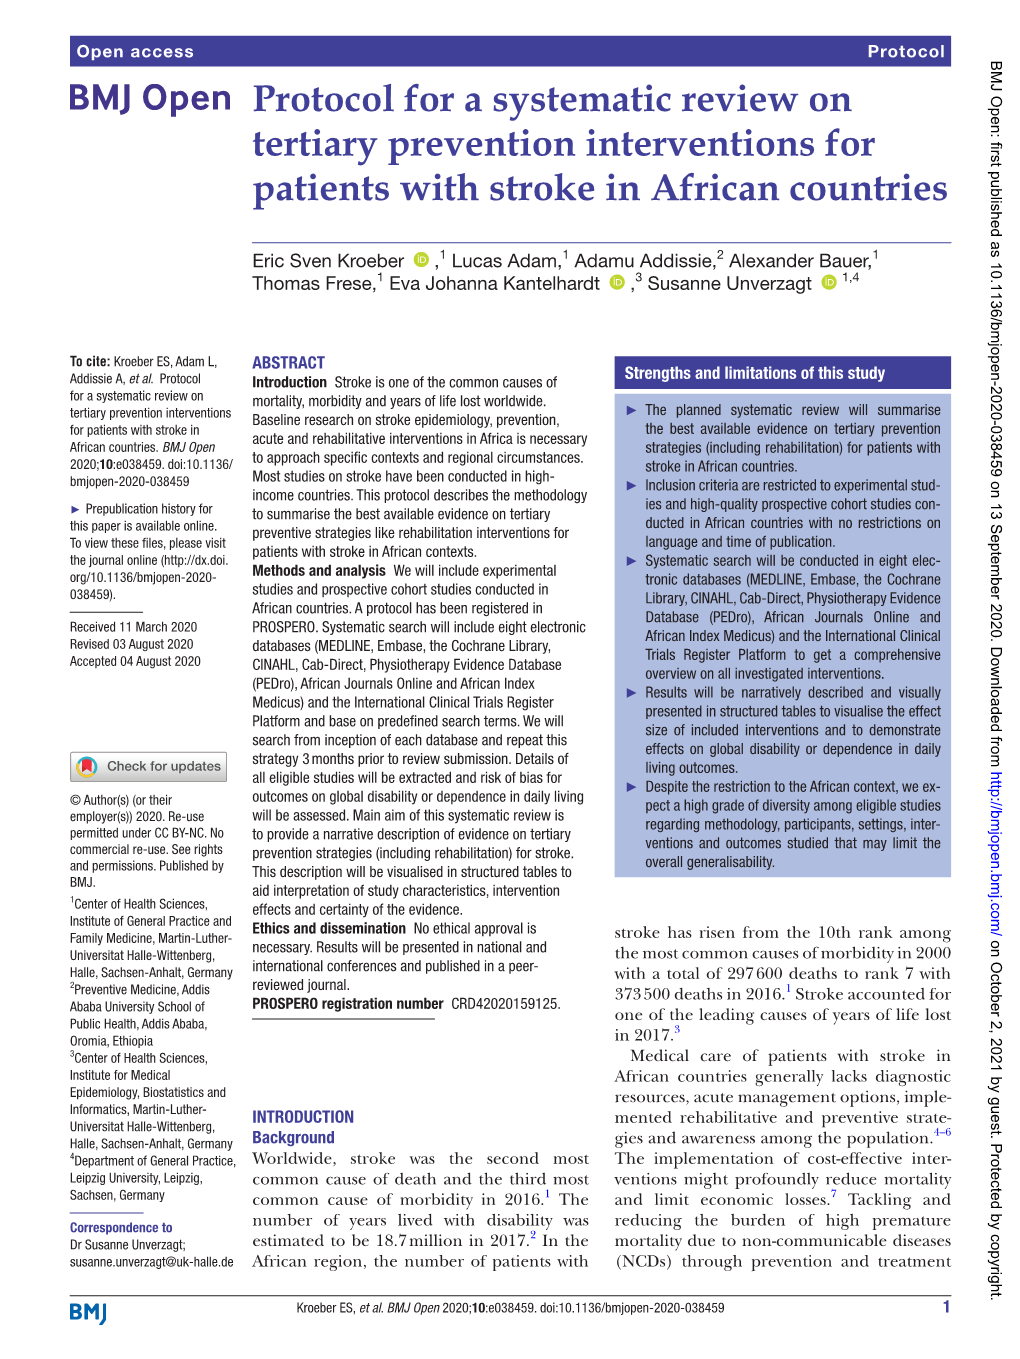 Protocol for a Systematic Review on Tertiary Prevention Interventions for Patients with Stroke in African Countries